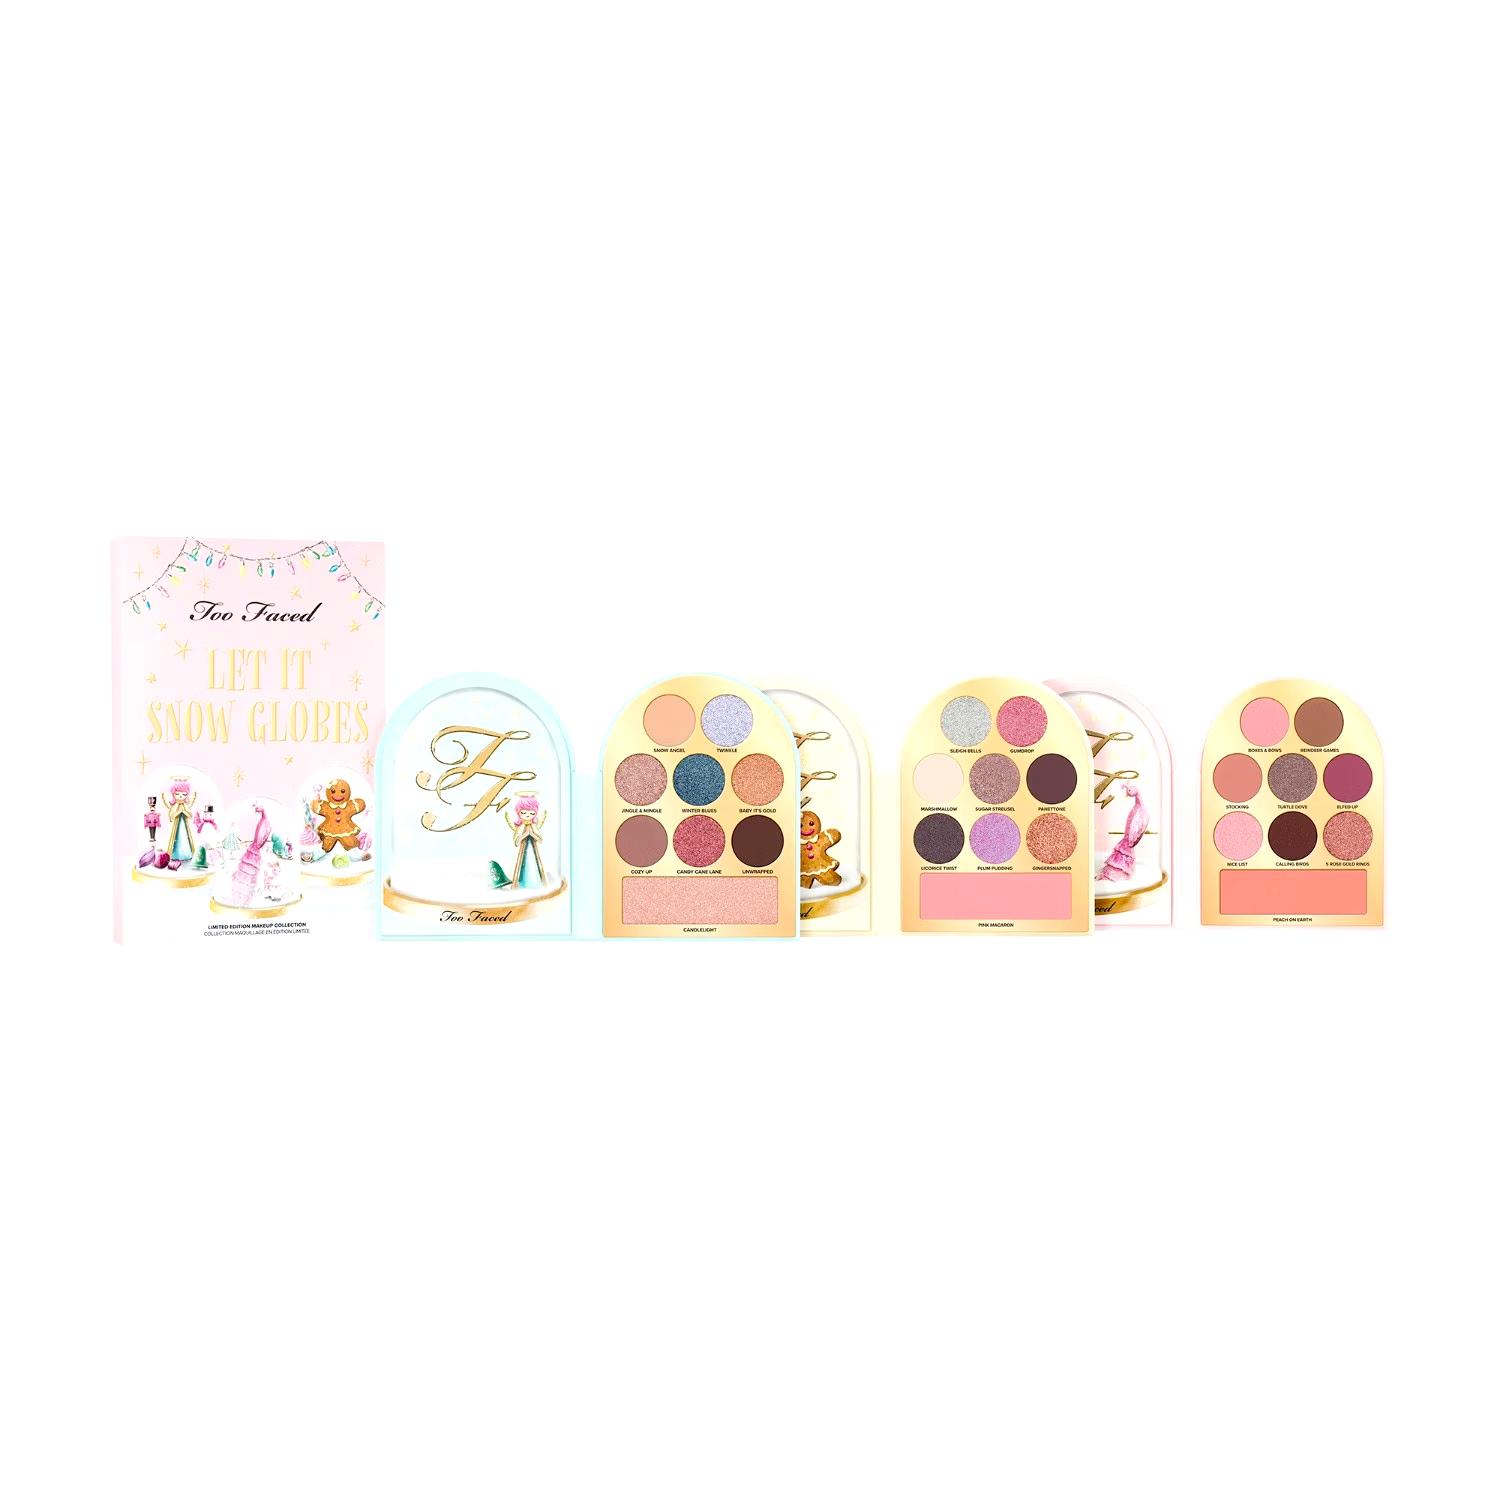 Christmas Collection 2023Let It Snow Globes
Make-up Set